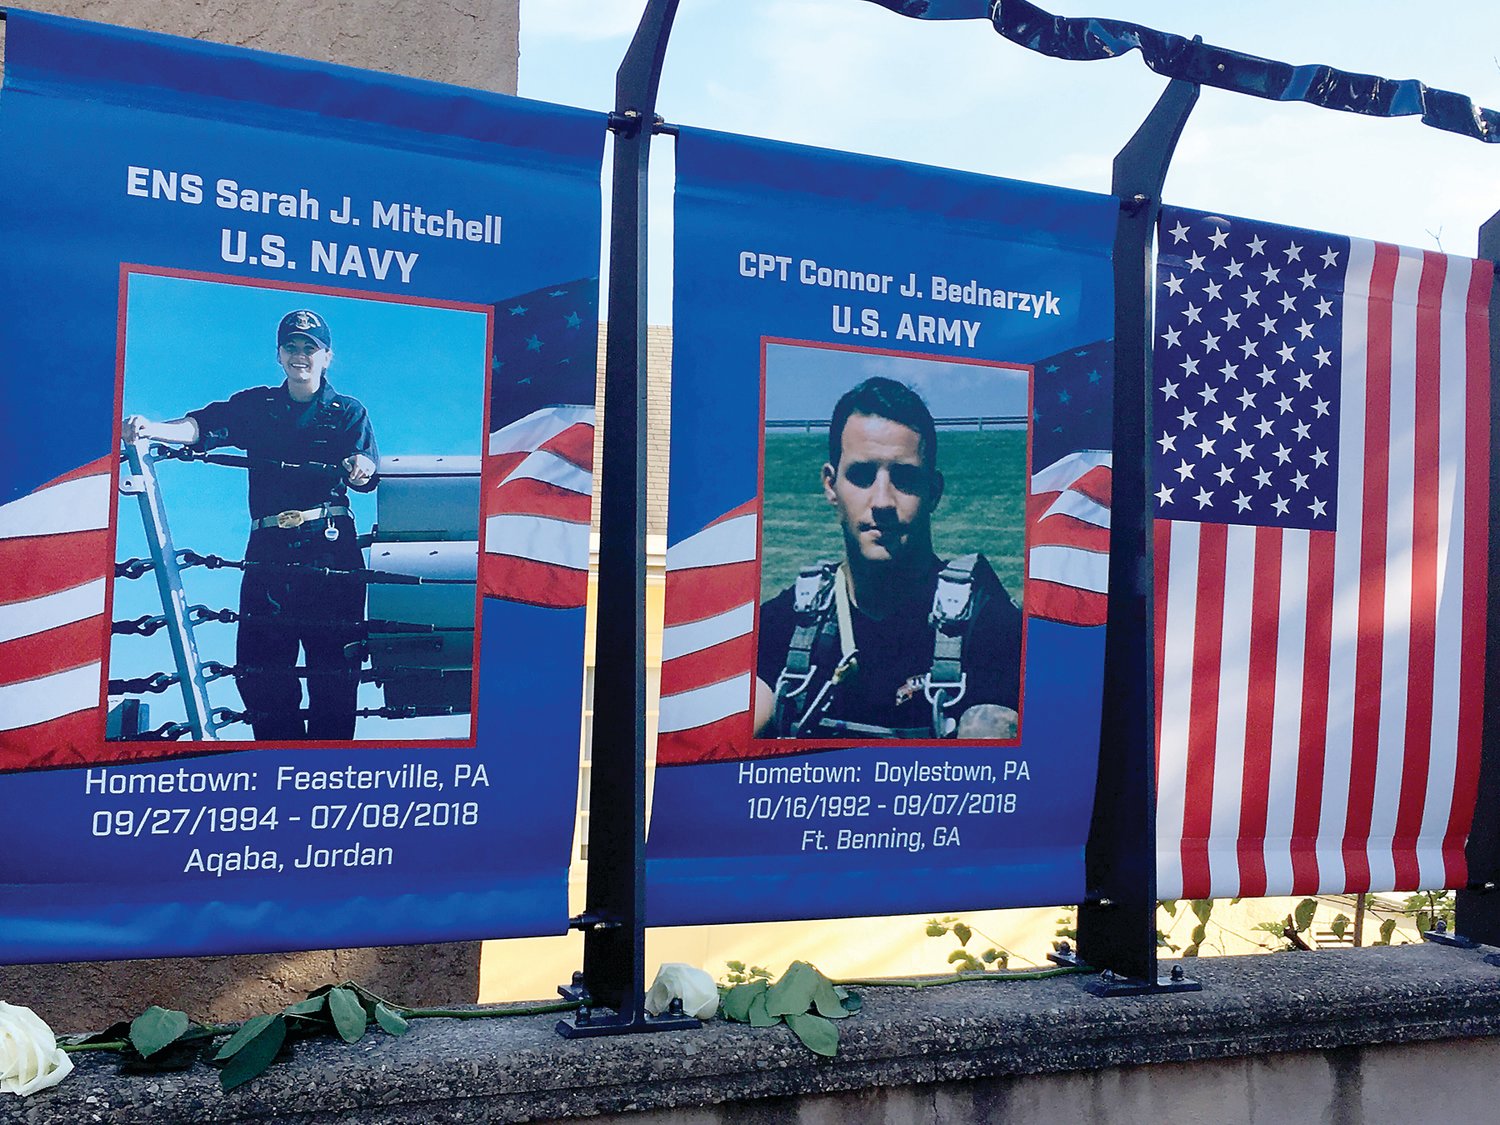 Banners of the fallen heroes were unveiled at a ceremony in Freedom Square in Doylestown on Sept. 20. Photograph by Freda R. Savana.